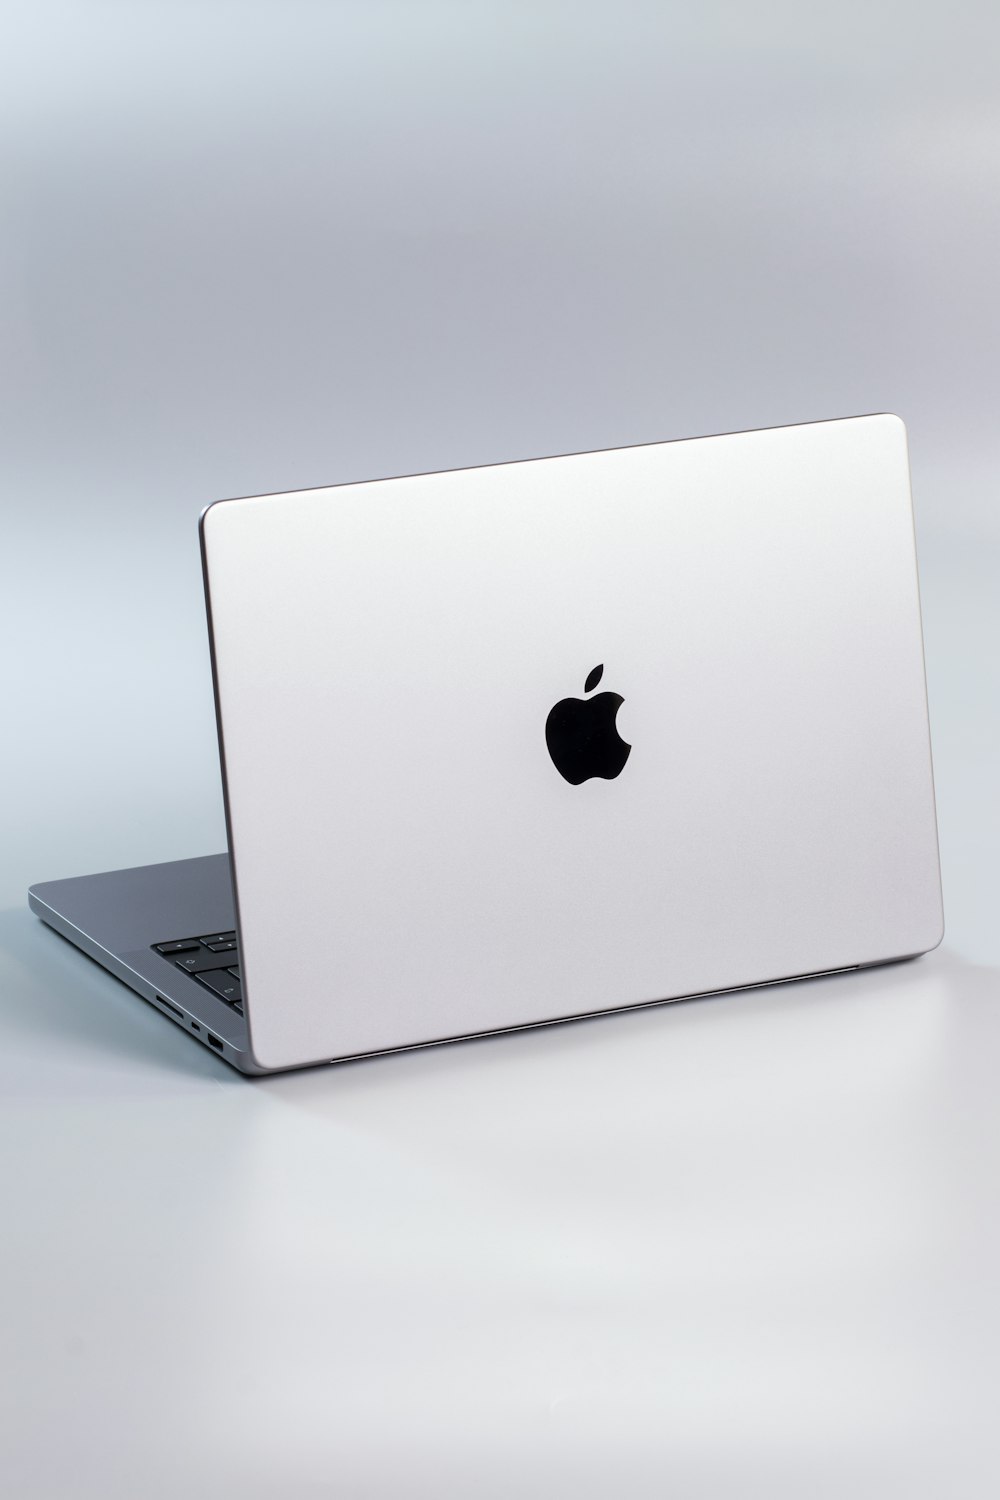 a silver laptop with a black apple logo on the screen